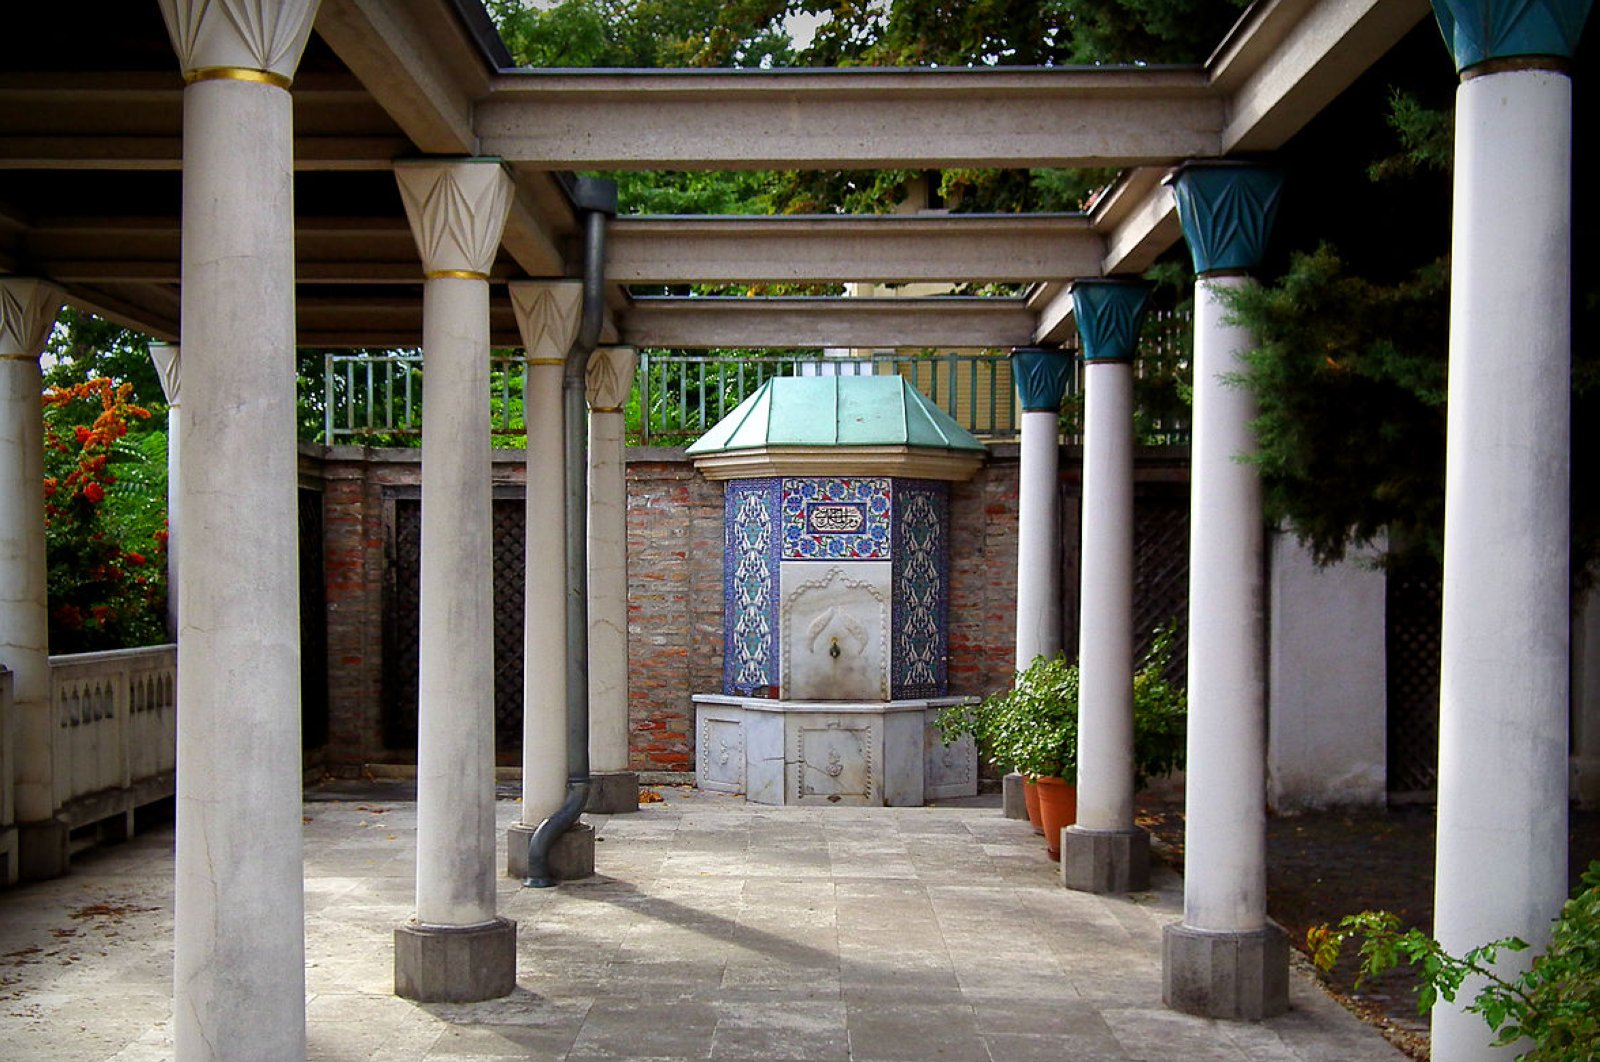 A fountain in the garden of the Tomb of Gül Baba, Budapest, Hungary.